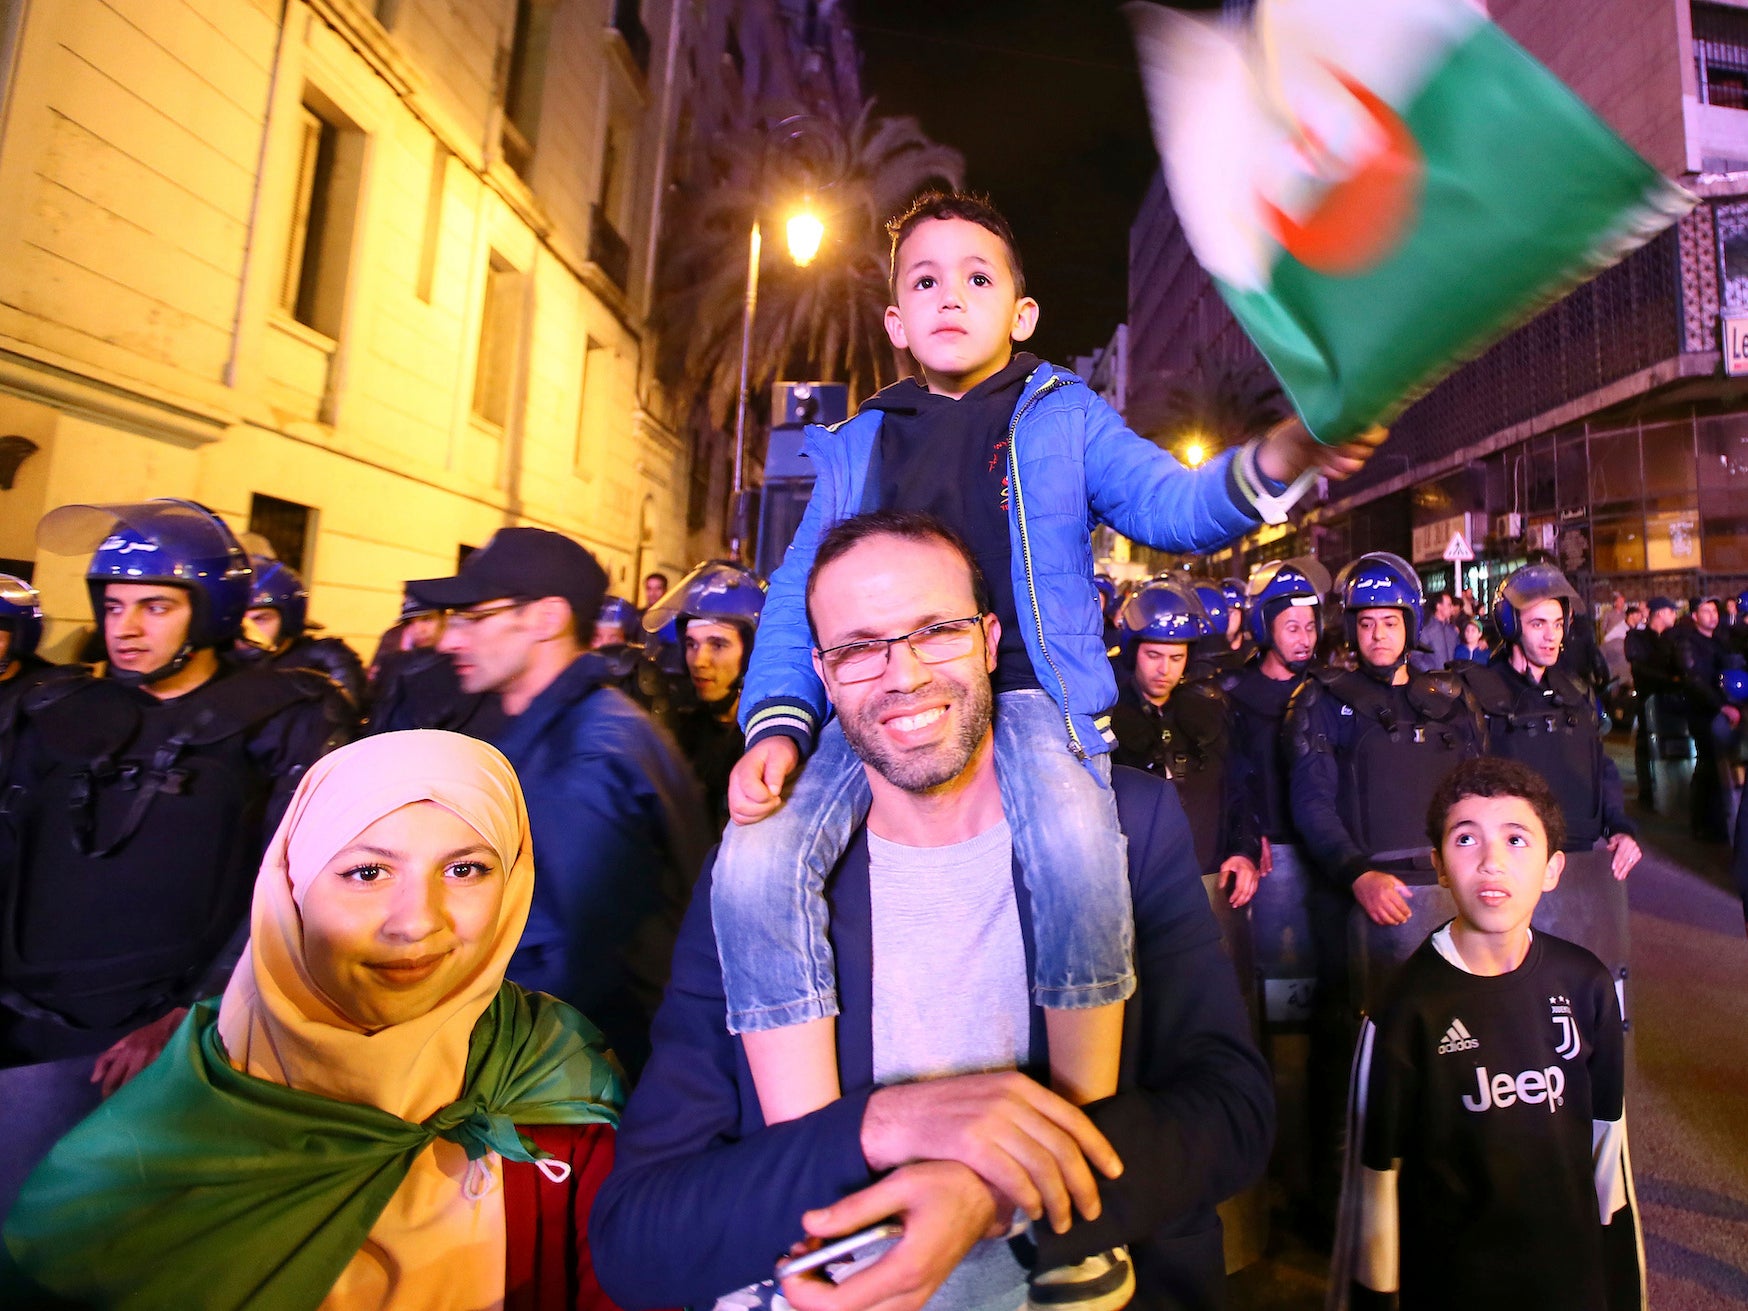 Abdelaziz Bouteflika: Protesters and opposition demand more reforms after Algerian president resigns